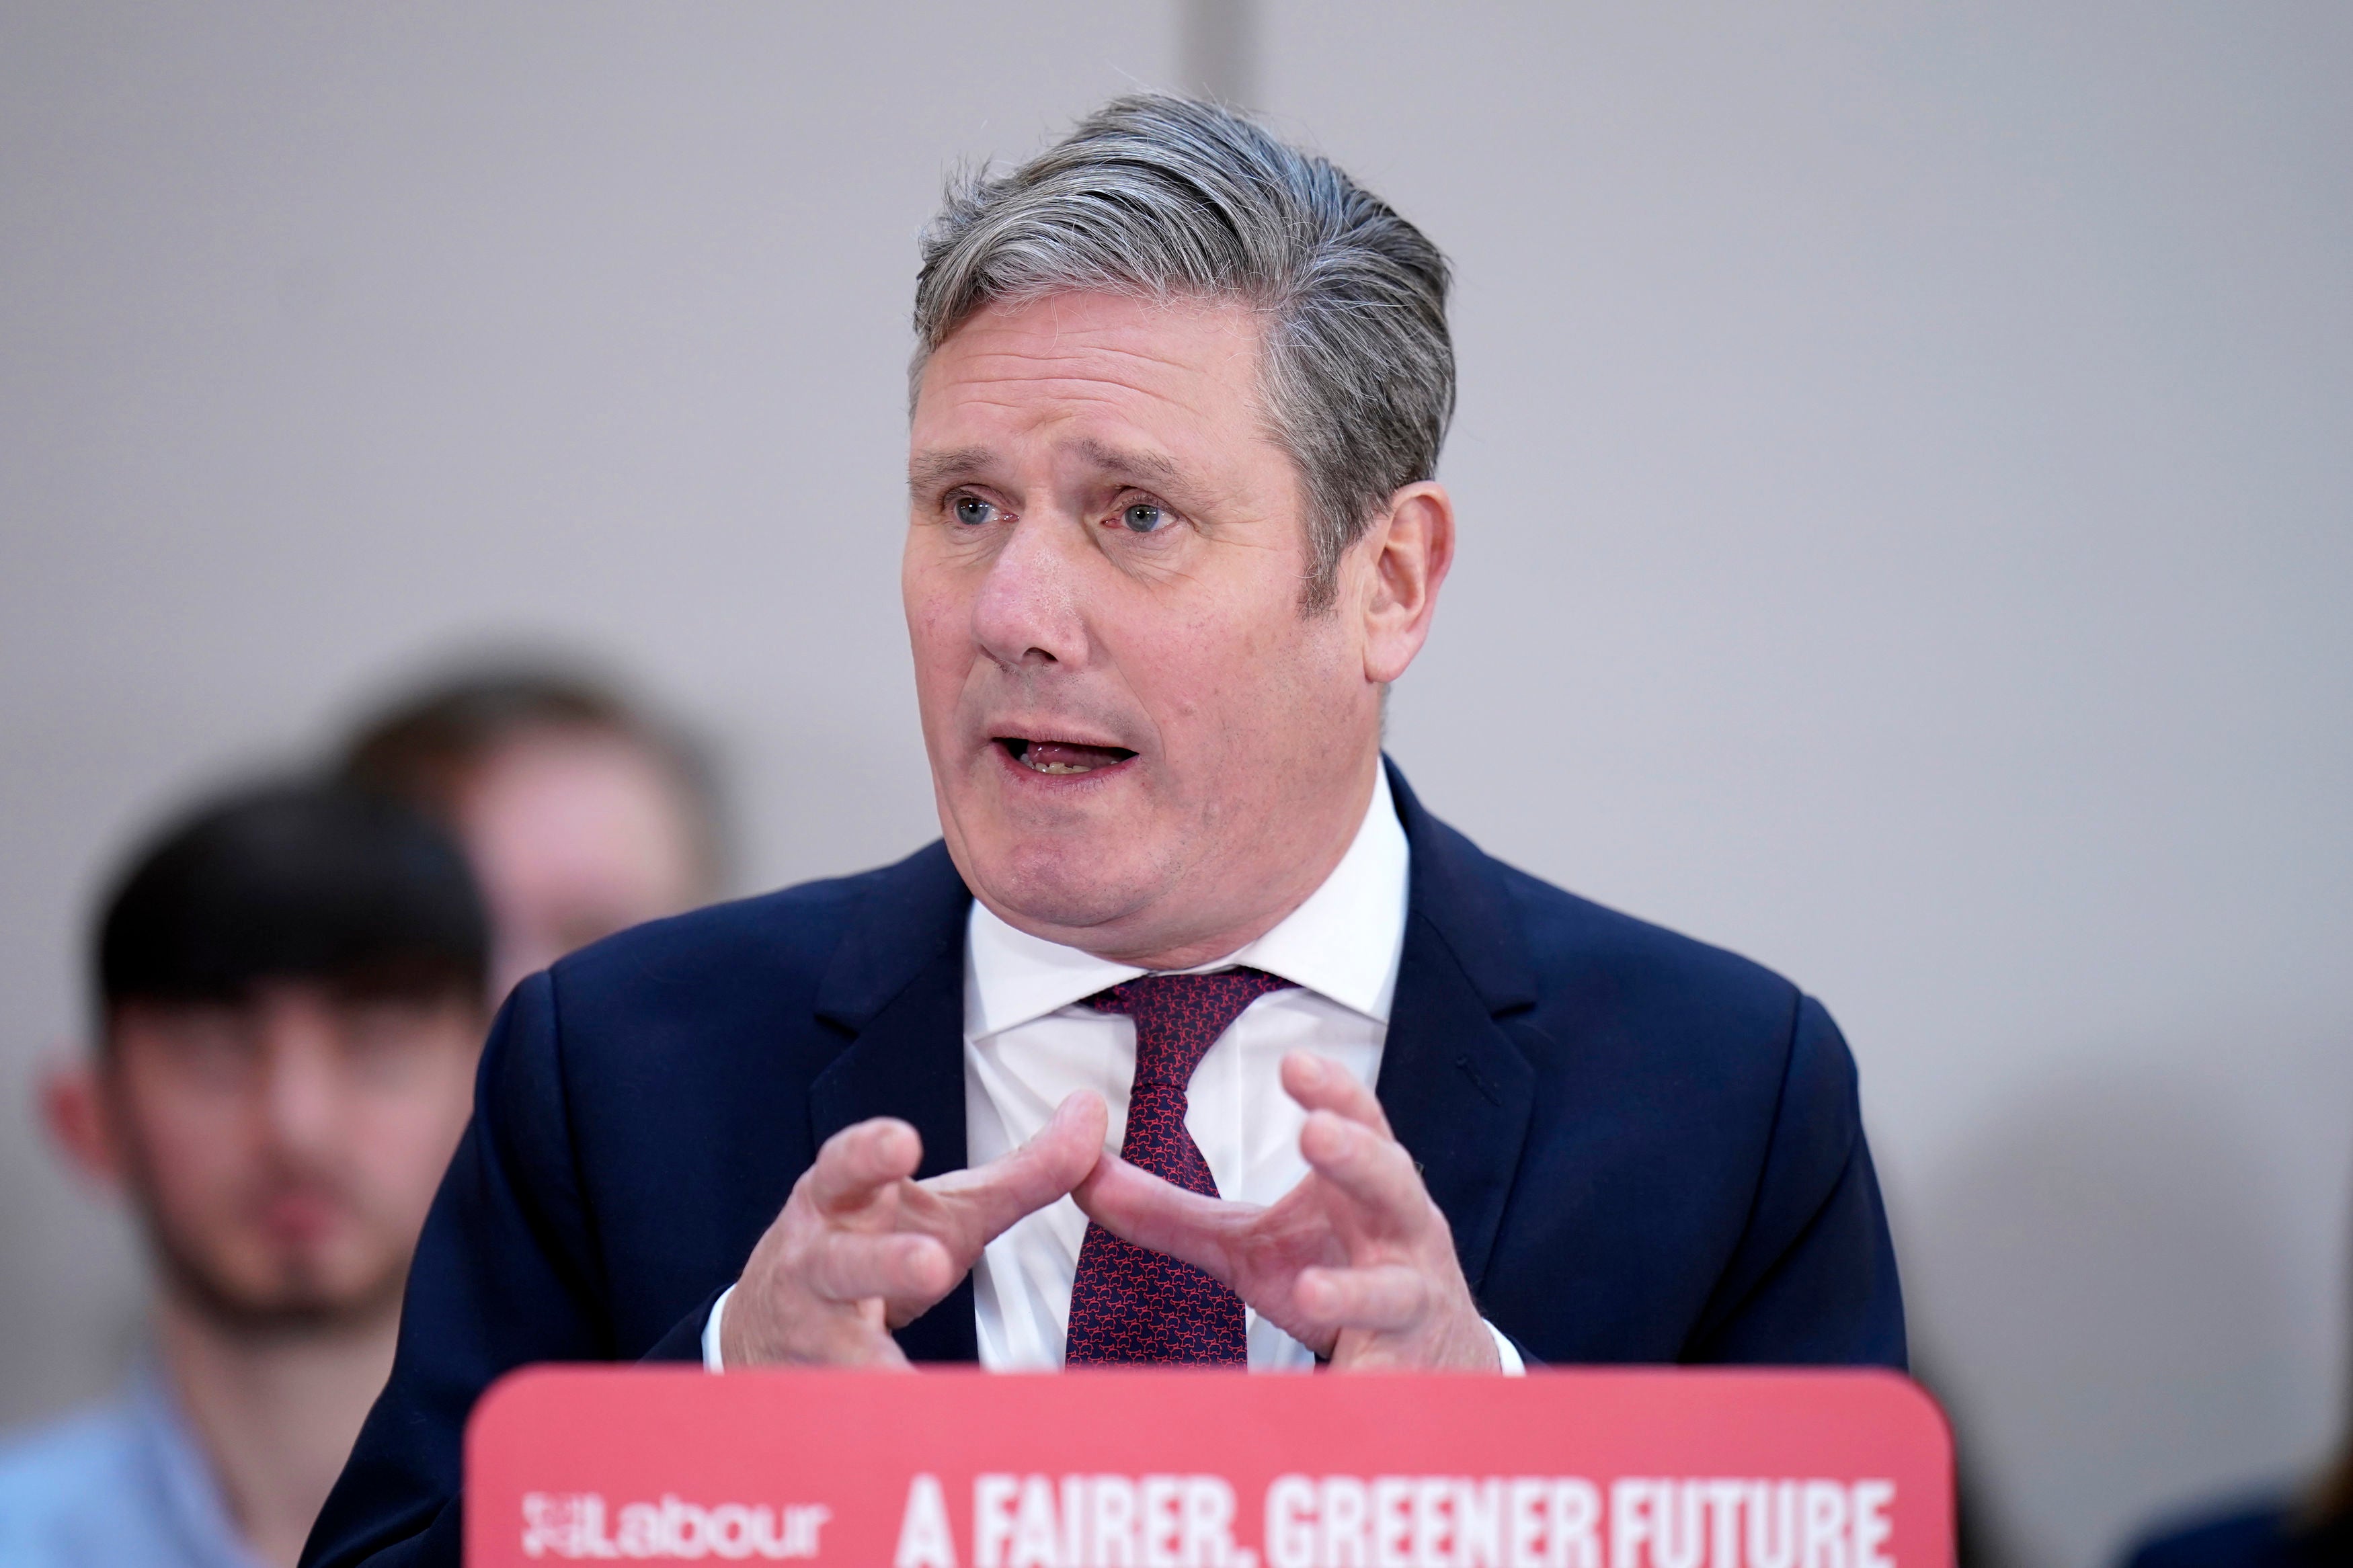 Starmer’s pledges are an echo of New Labour’s 1997 promises